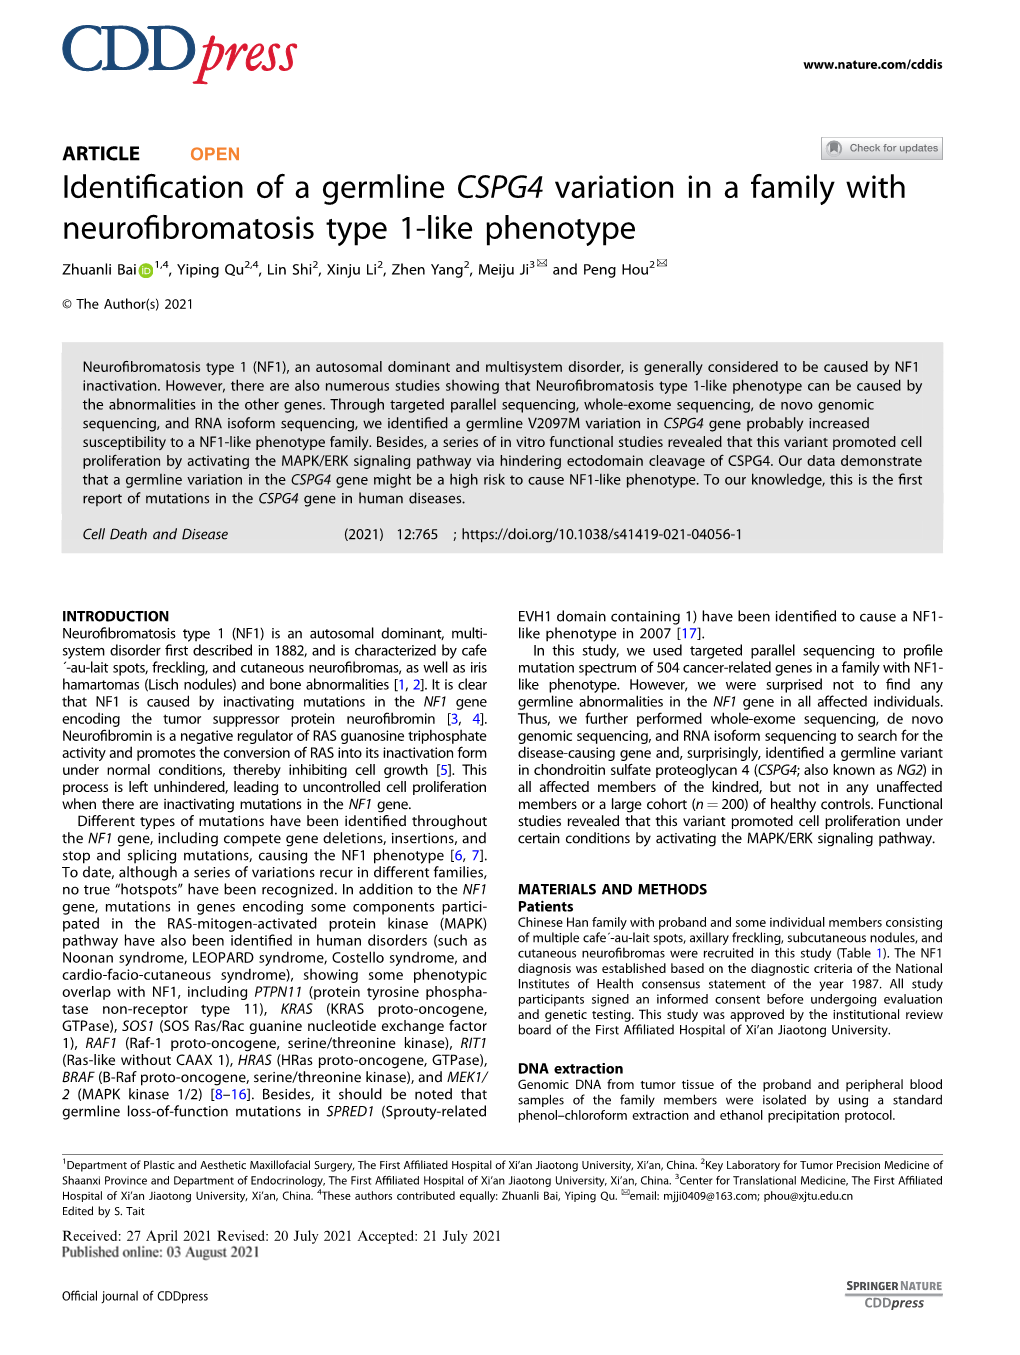 Identification of a Germline CSPG4 Variation in a Family With